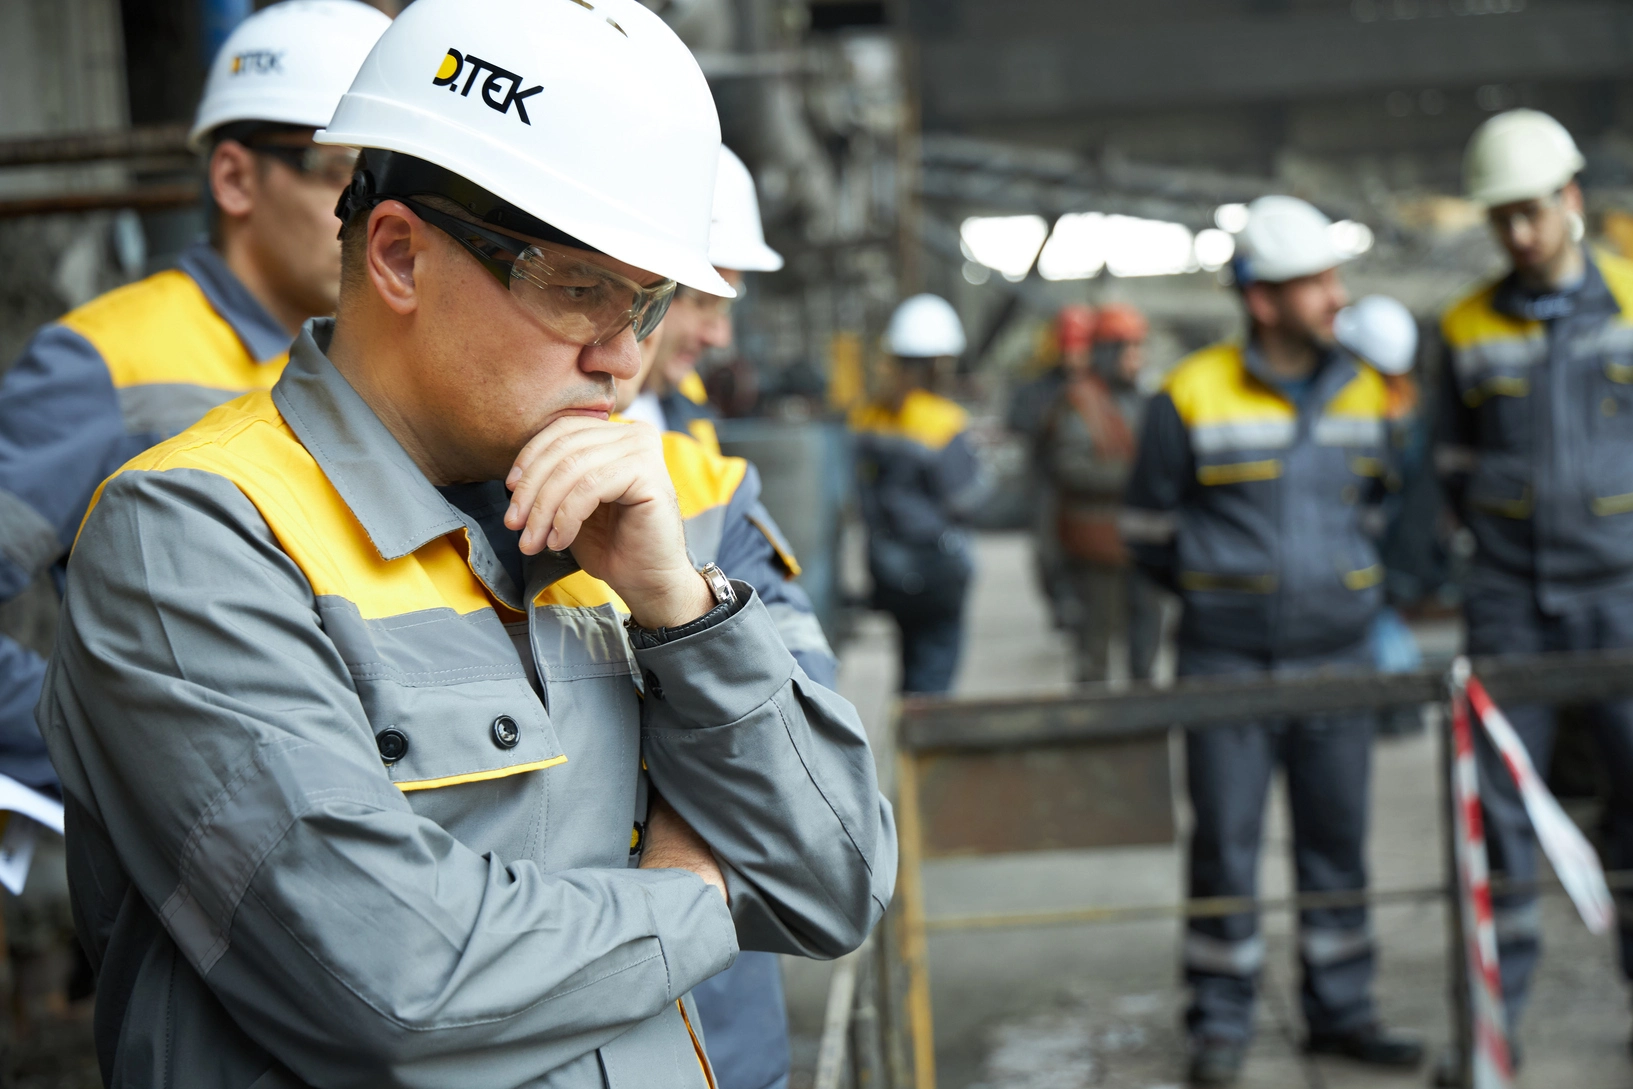 Image library / DTEK CEO Maxim Timchenko and employees inspect damage at a DTEK power station after russian attacks in March 2024. The precise location and date are not disclosed due to security restrictions.